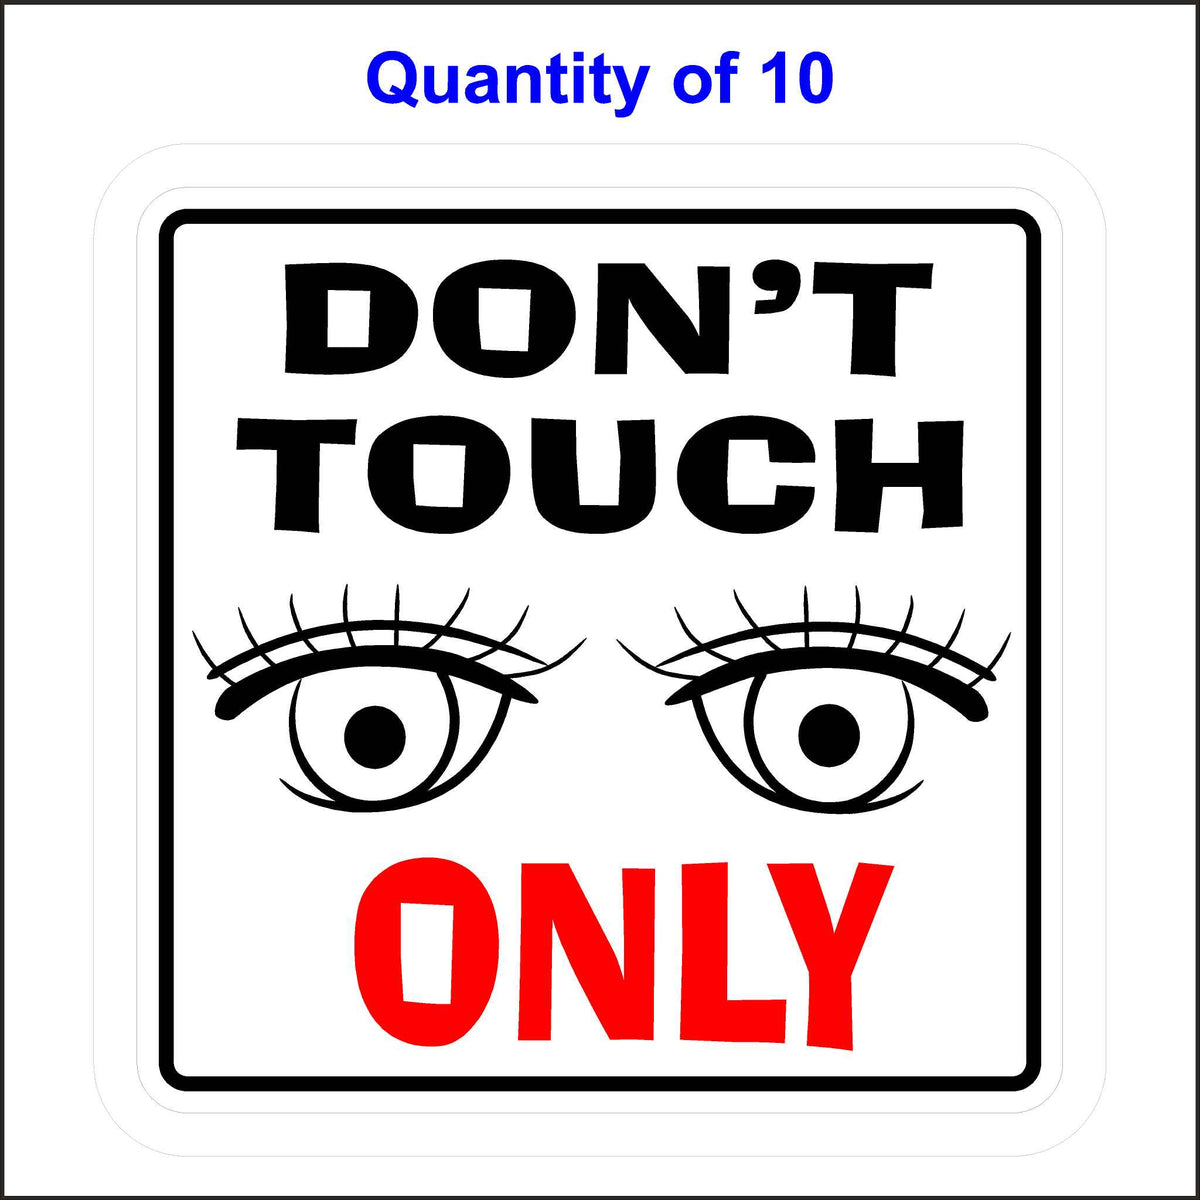 Don’t Touch, Look Only Sticker. Black and Red Text With Eyeballs Looking At You. 10 Quantity.